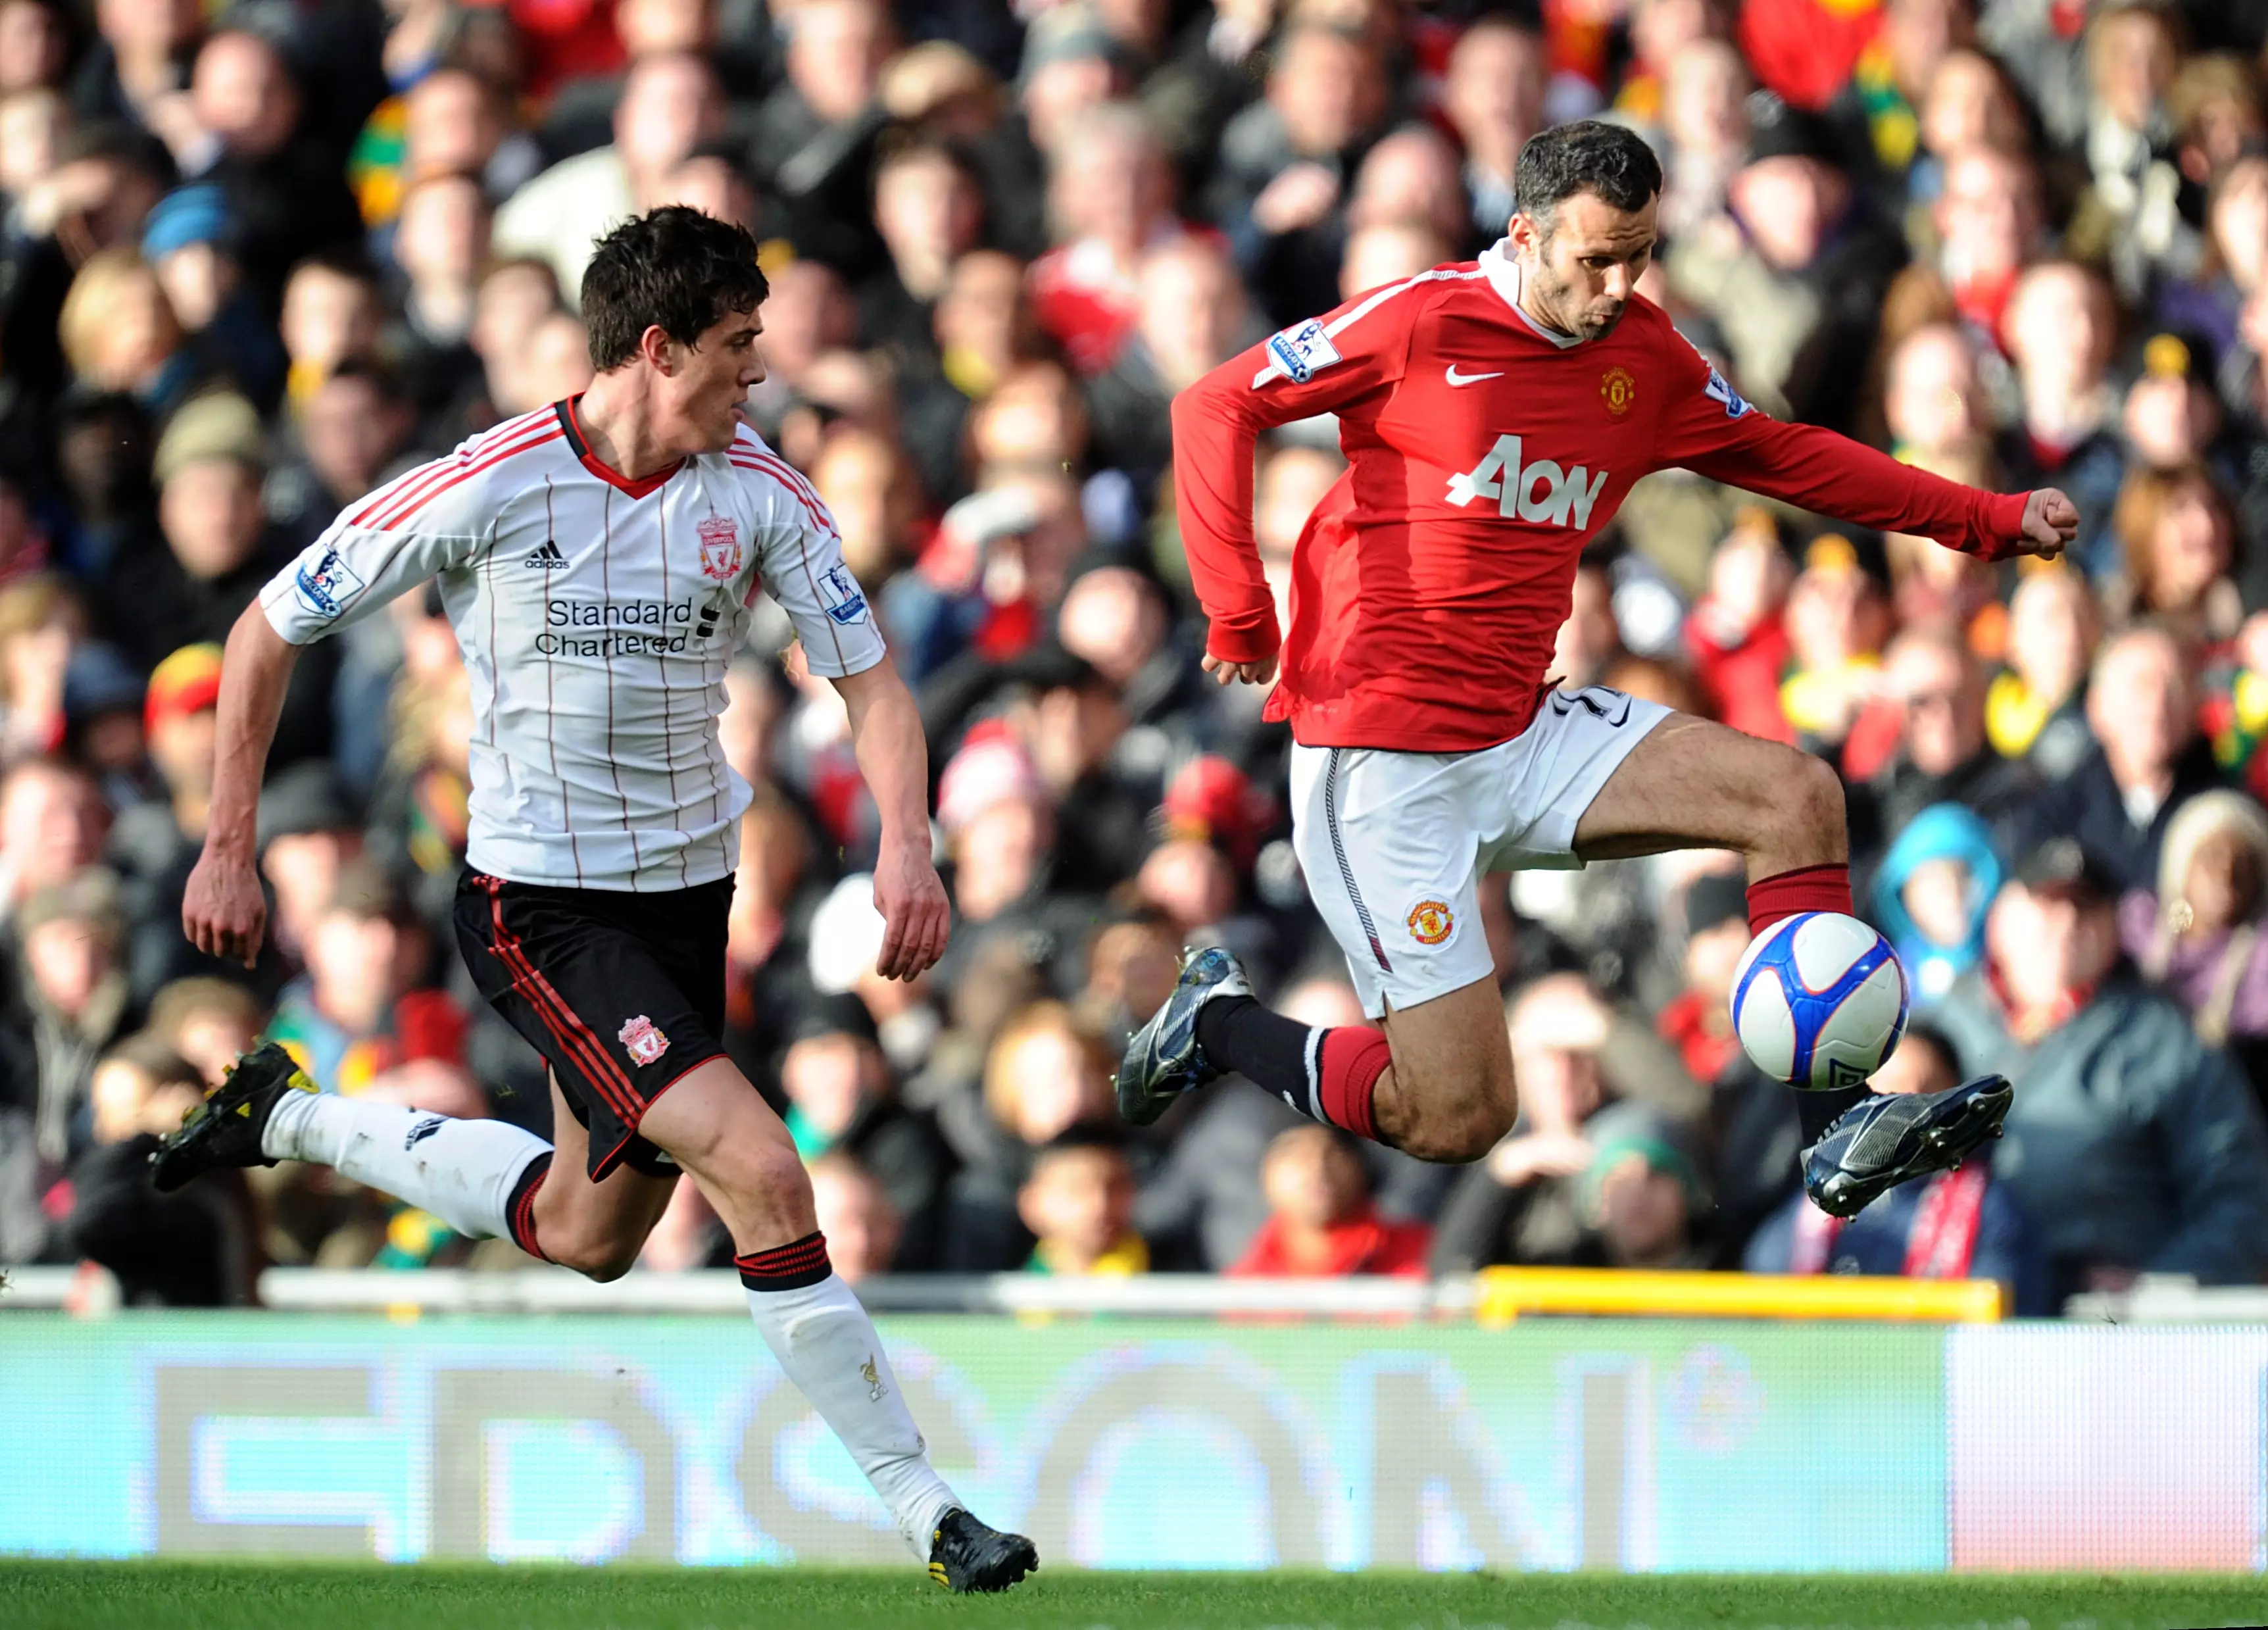 Giggs up against Martin Kelly on a different occasion. Image: PA Images